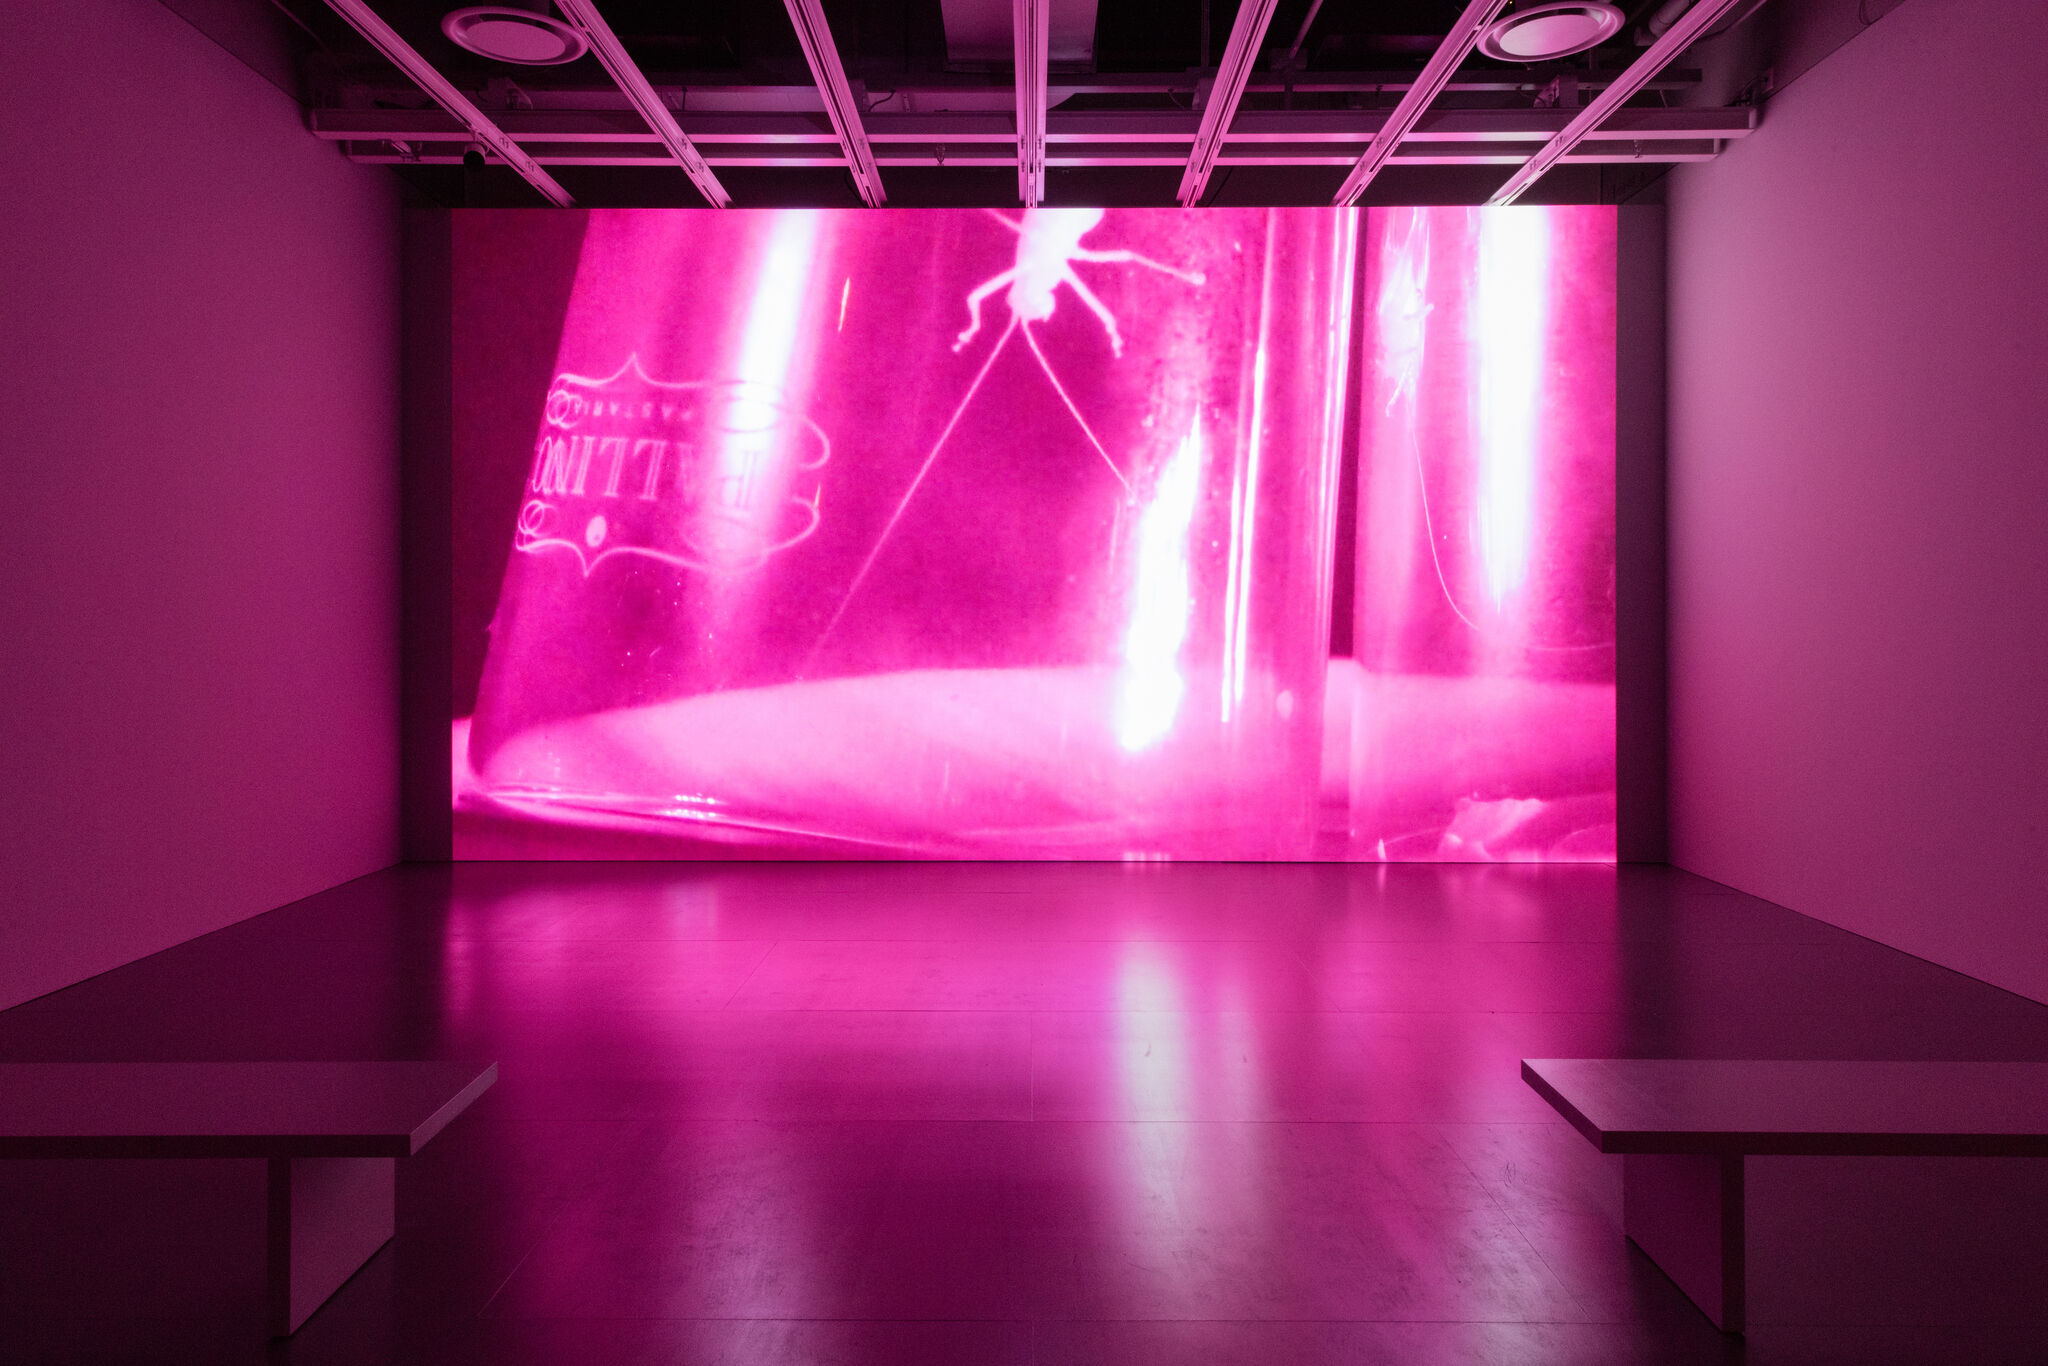 A floor-to-ceiling video screen featuring a still from Madeline Hollander's Flatwing video installation.